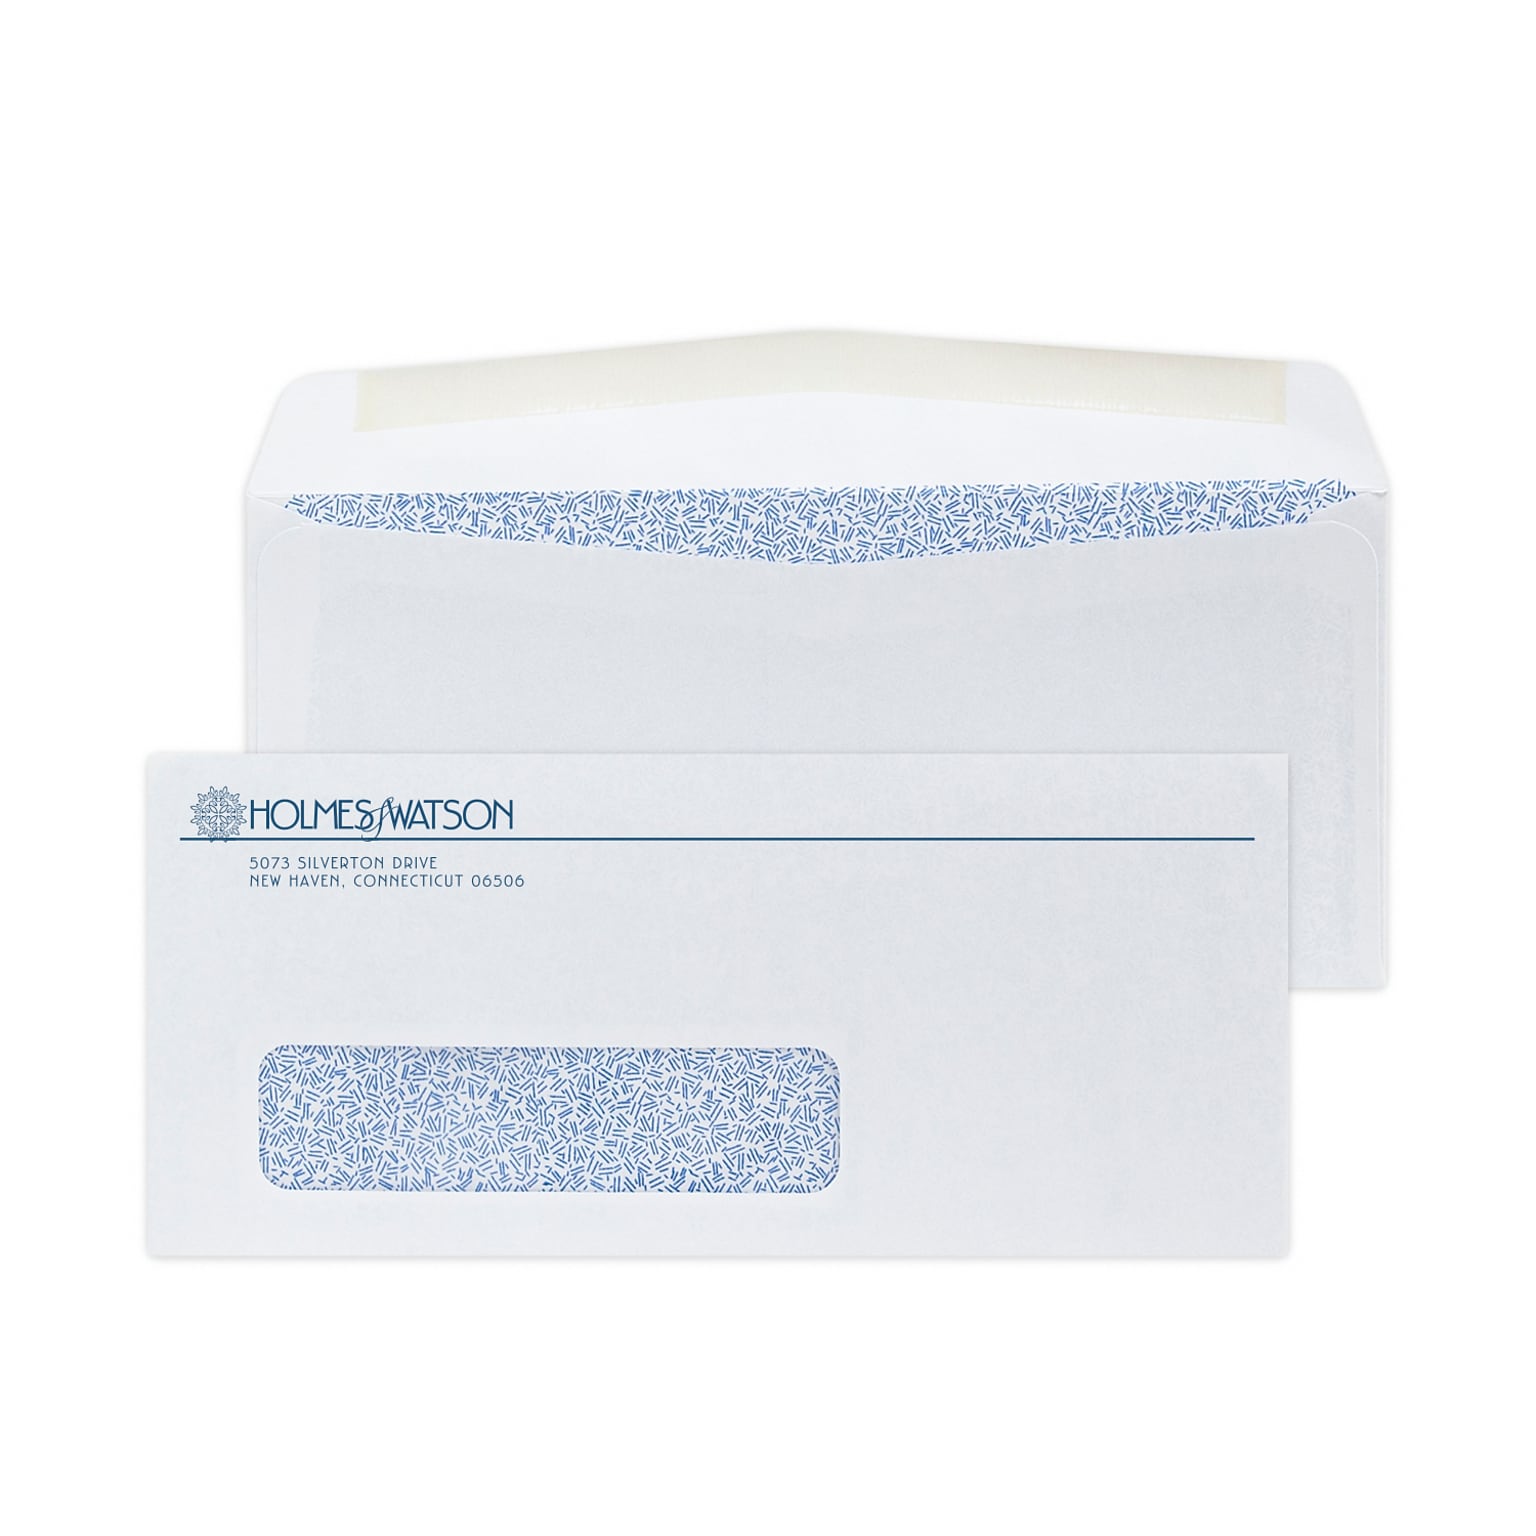 Custom #9 Window Envelopes with Security Tint, 3 7/8 x 8 7/8, 24# White Wove, 1 Custom Ink, 250 / Pack